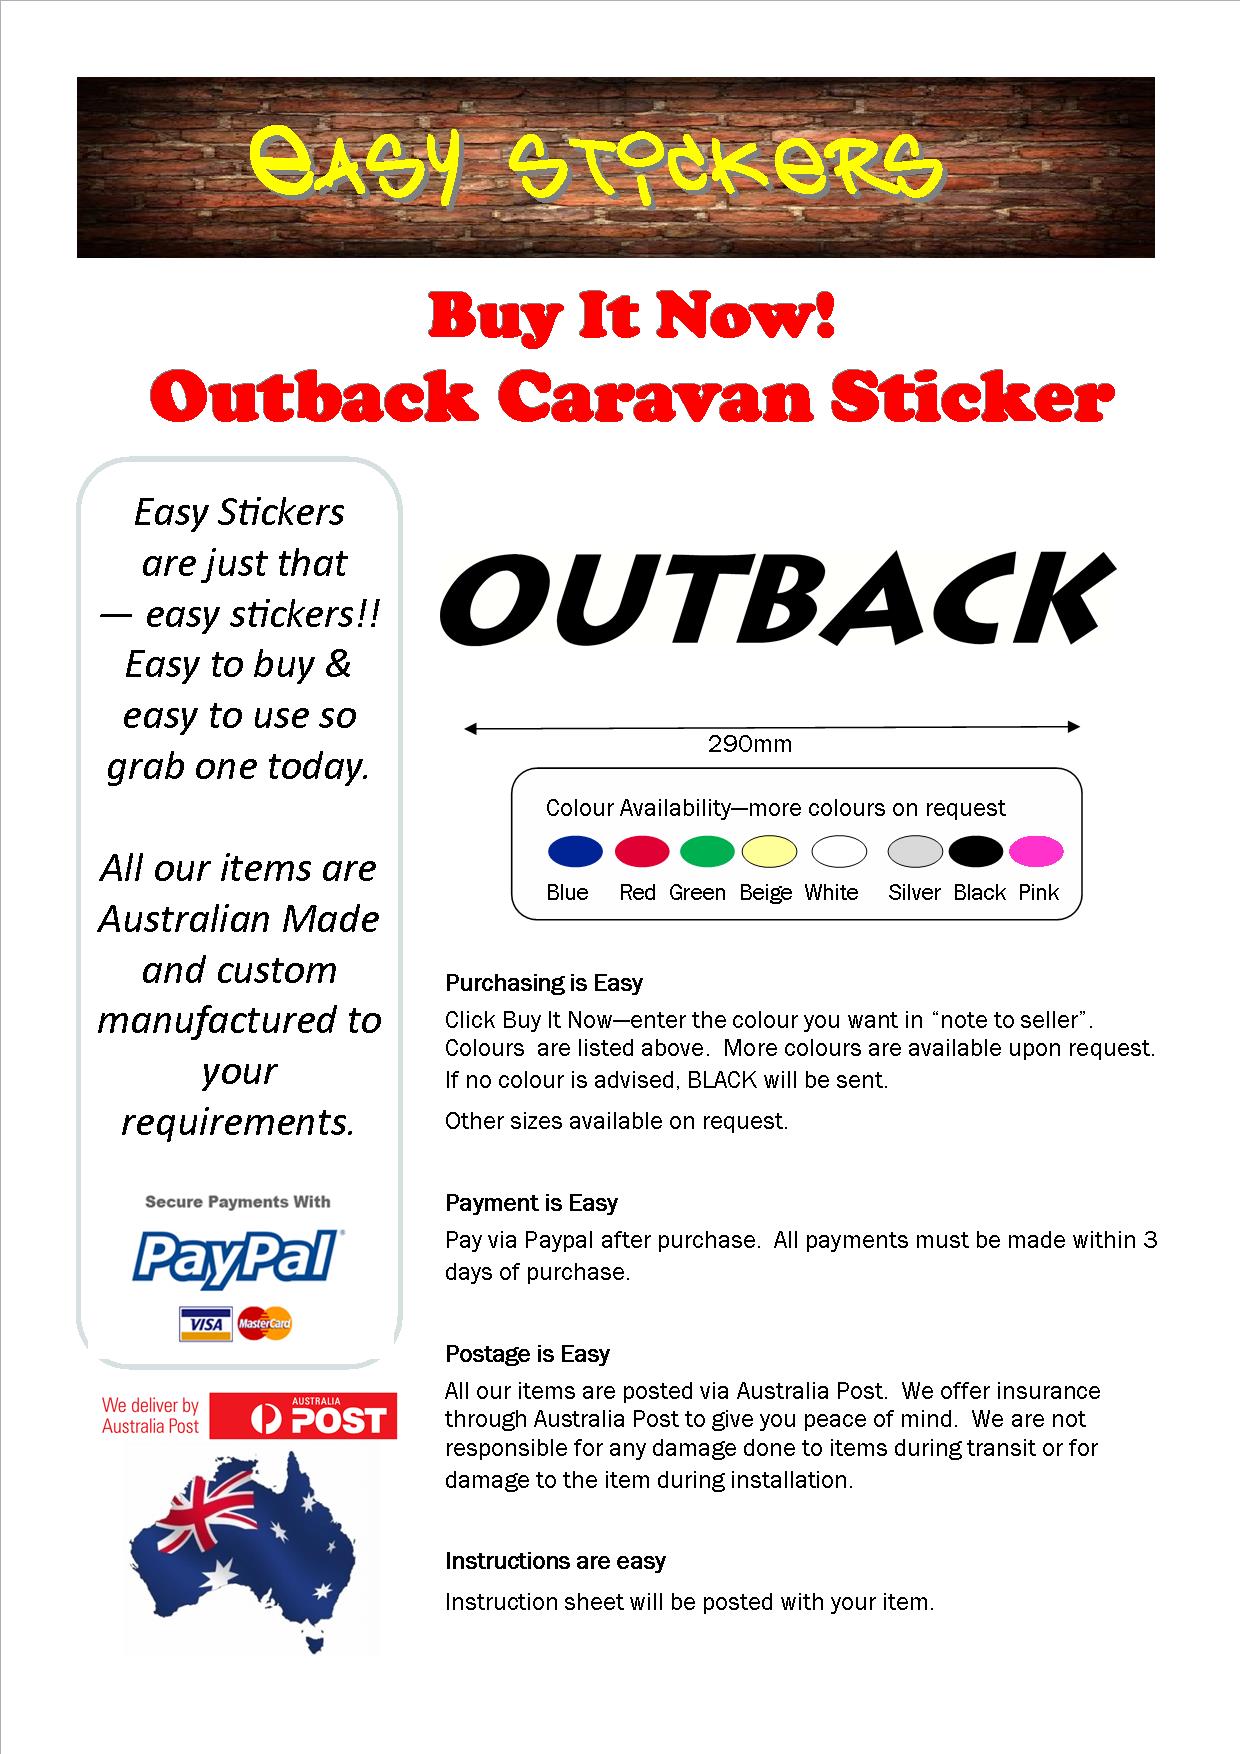 Ebay Template 290mm Outback.jpg  by easystickers